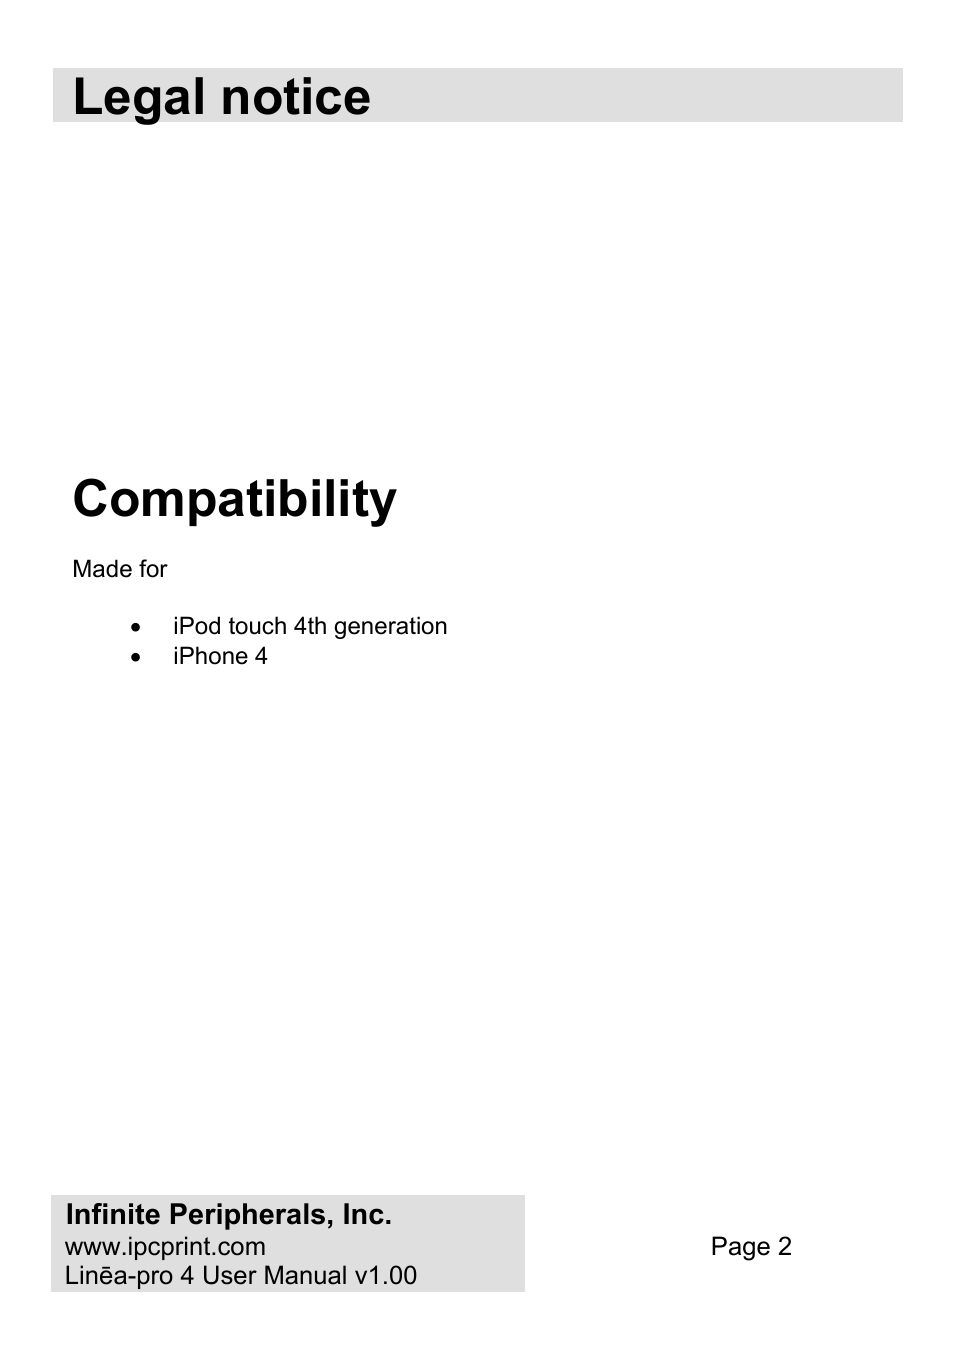 Legal notice, Compatibility | Infinite Peripherals PRO 4 User Manual | Page 2 / 24